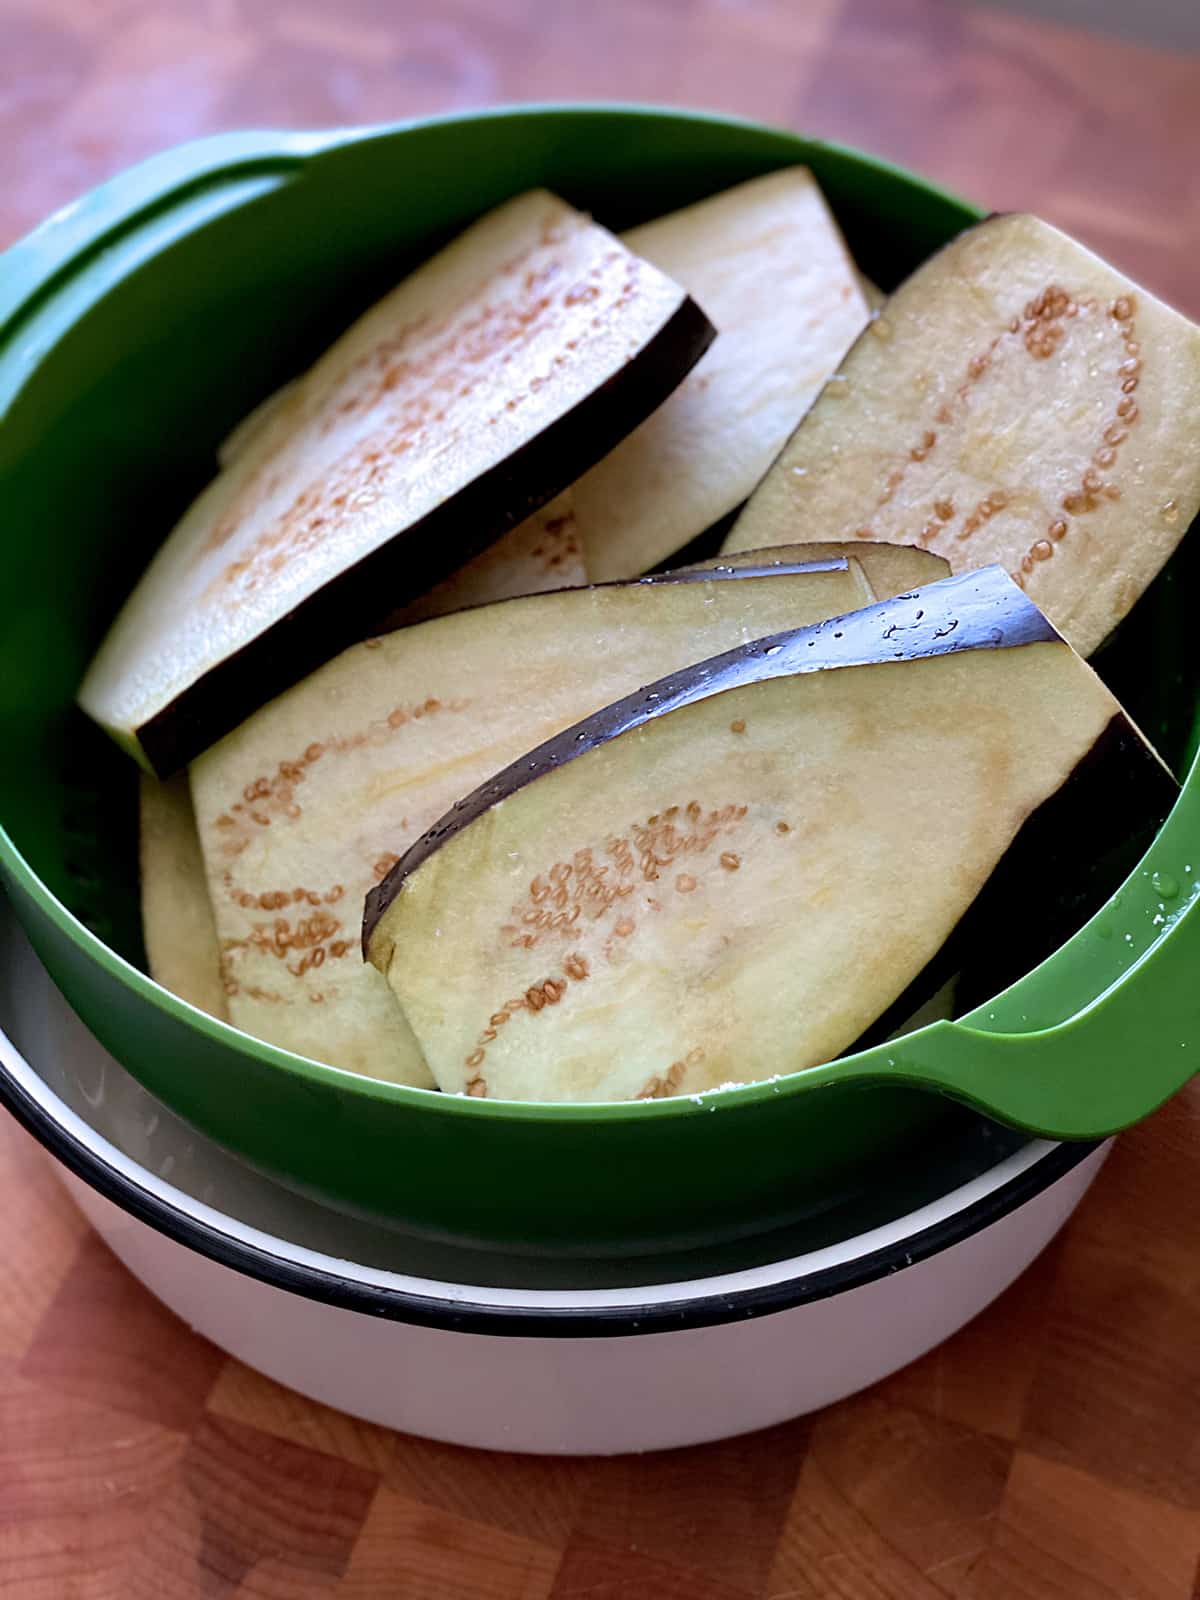 A green colander with eggplant slices in a white bowl on a butcher block.